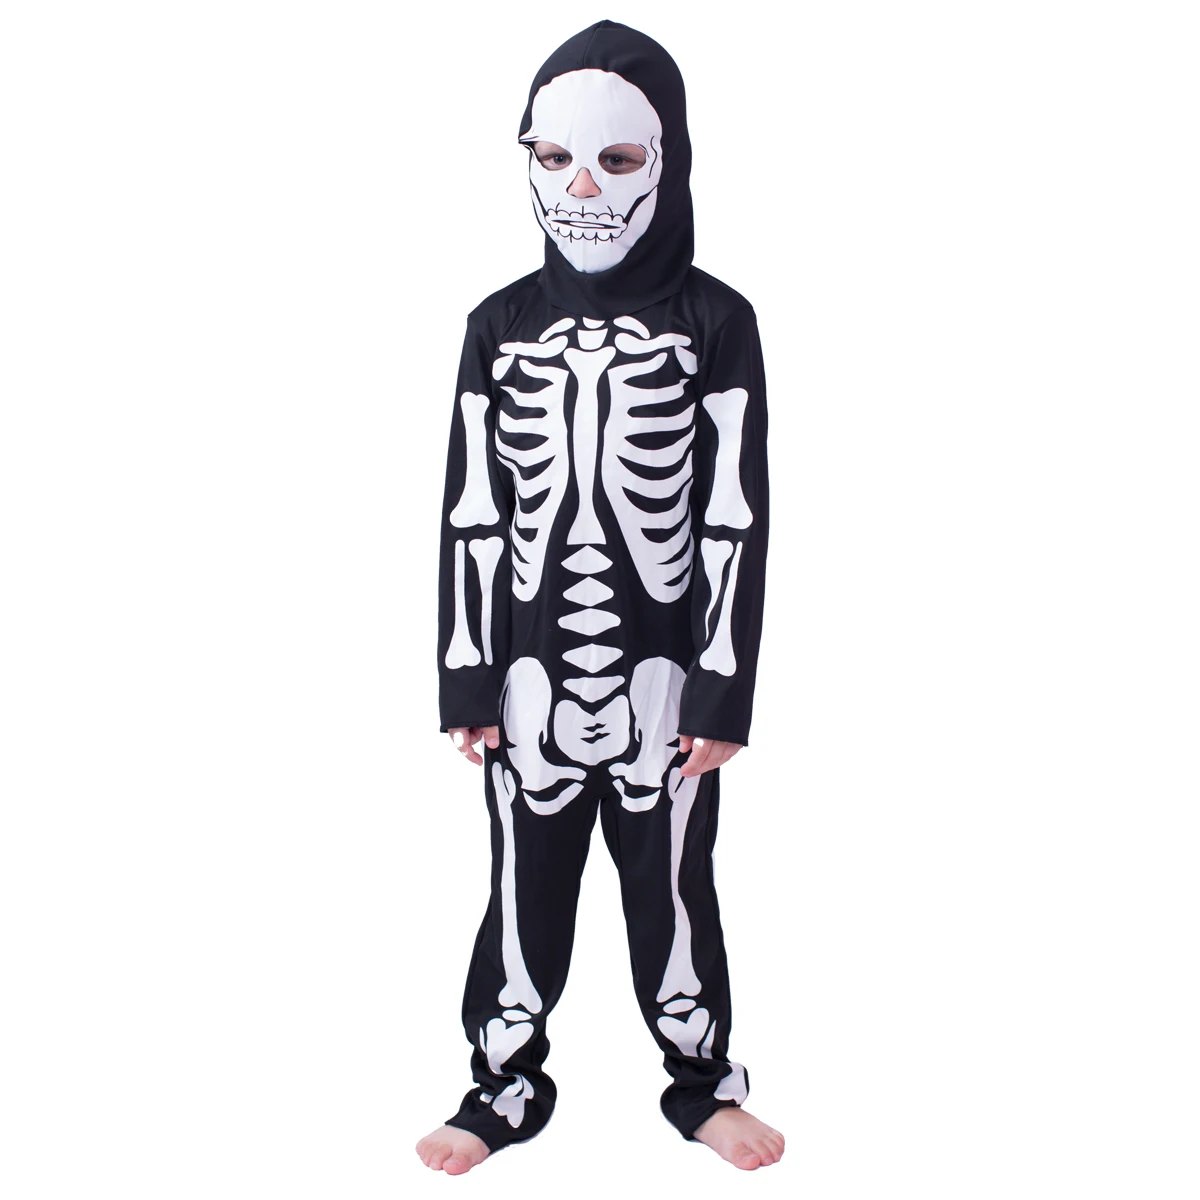 

Halloween Skeleton Costume Kids Skull Bones Jumpsuit Child Fancy Dress Scary Ghost Outfit Cosplay Carnival Party Set with Mask